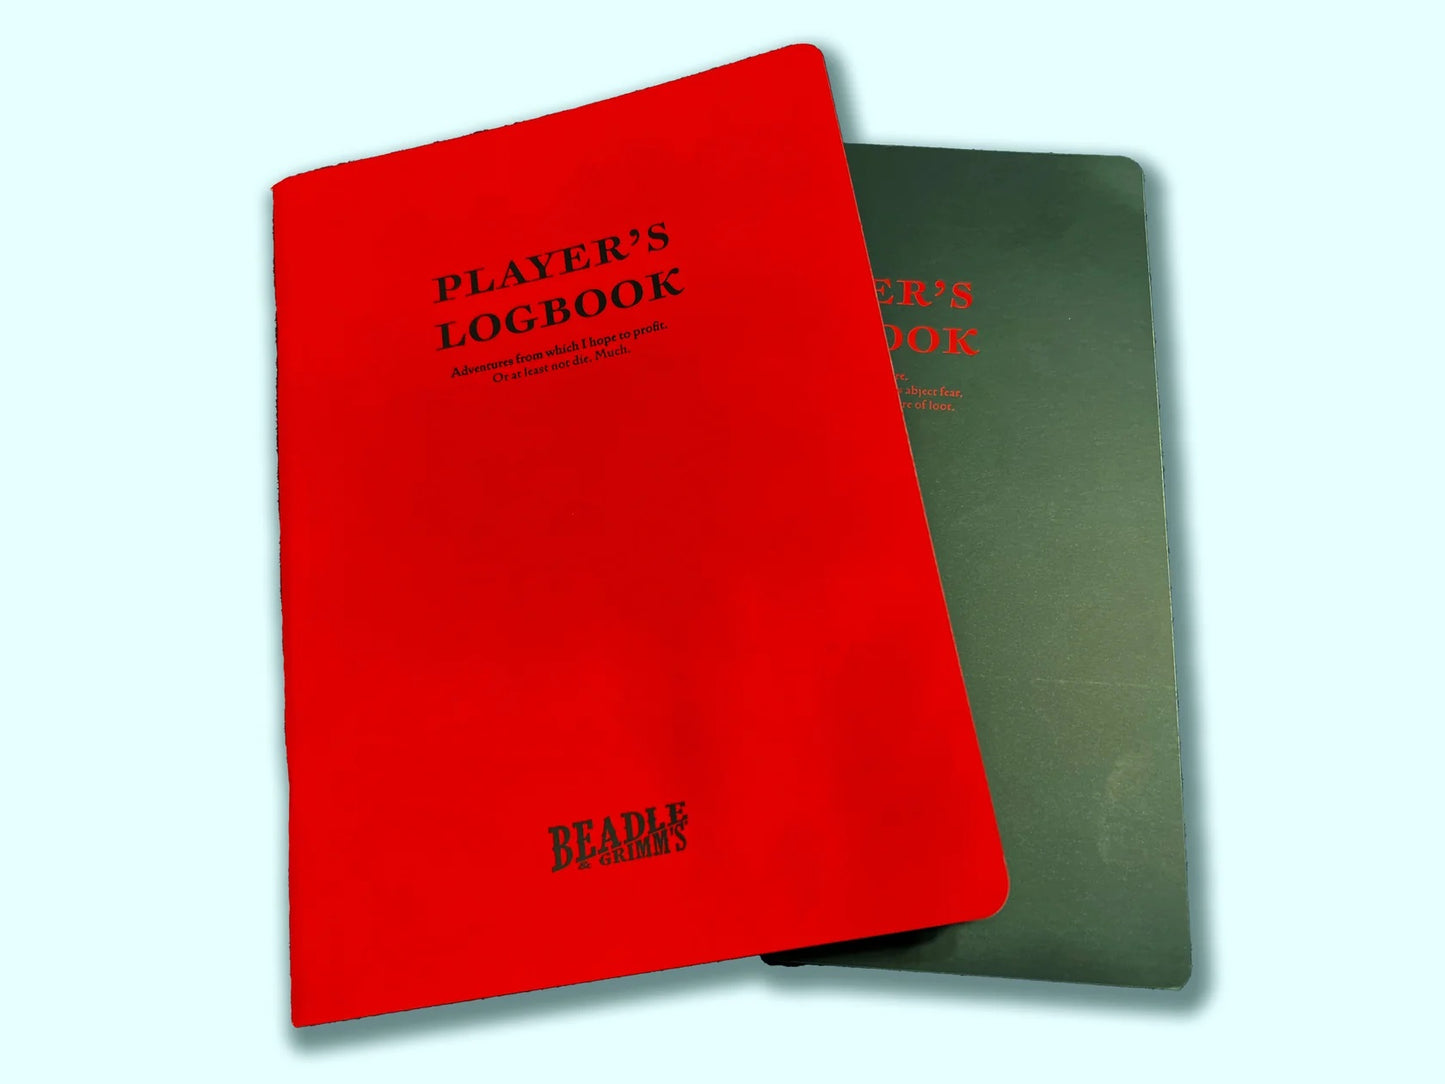 Beadle & Grimm's Player's Logbook (set of 2)